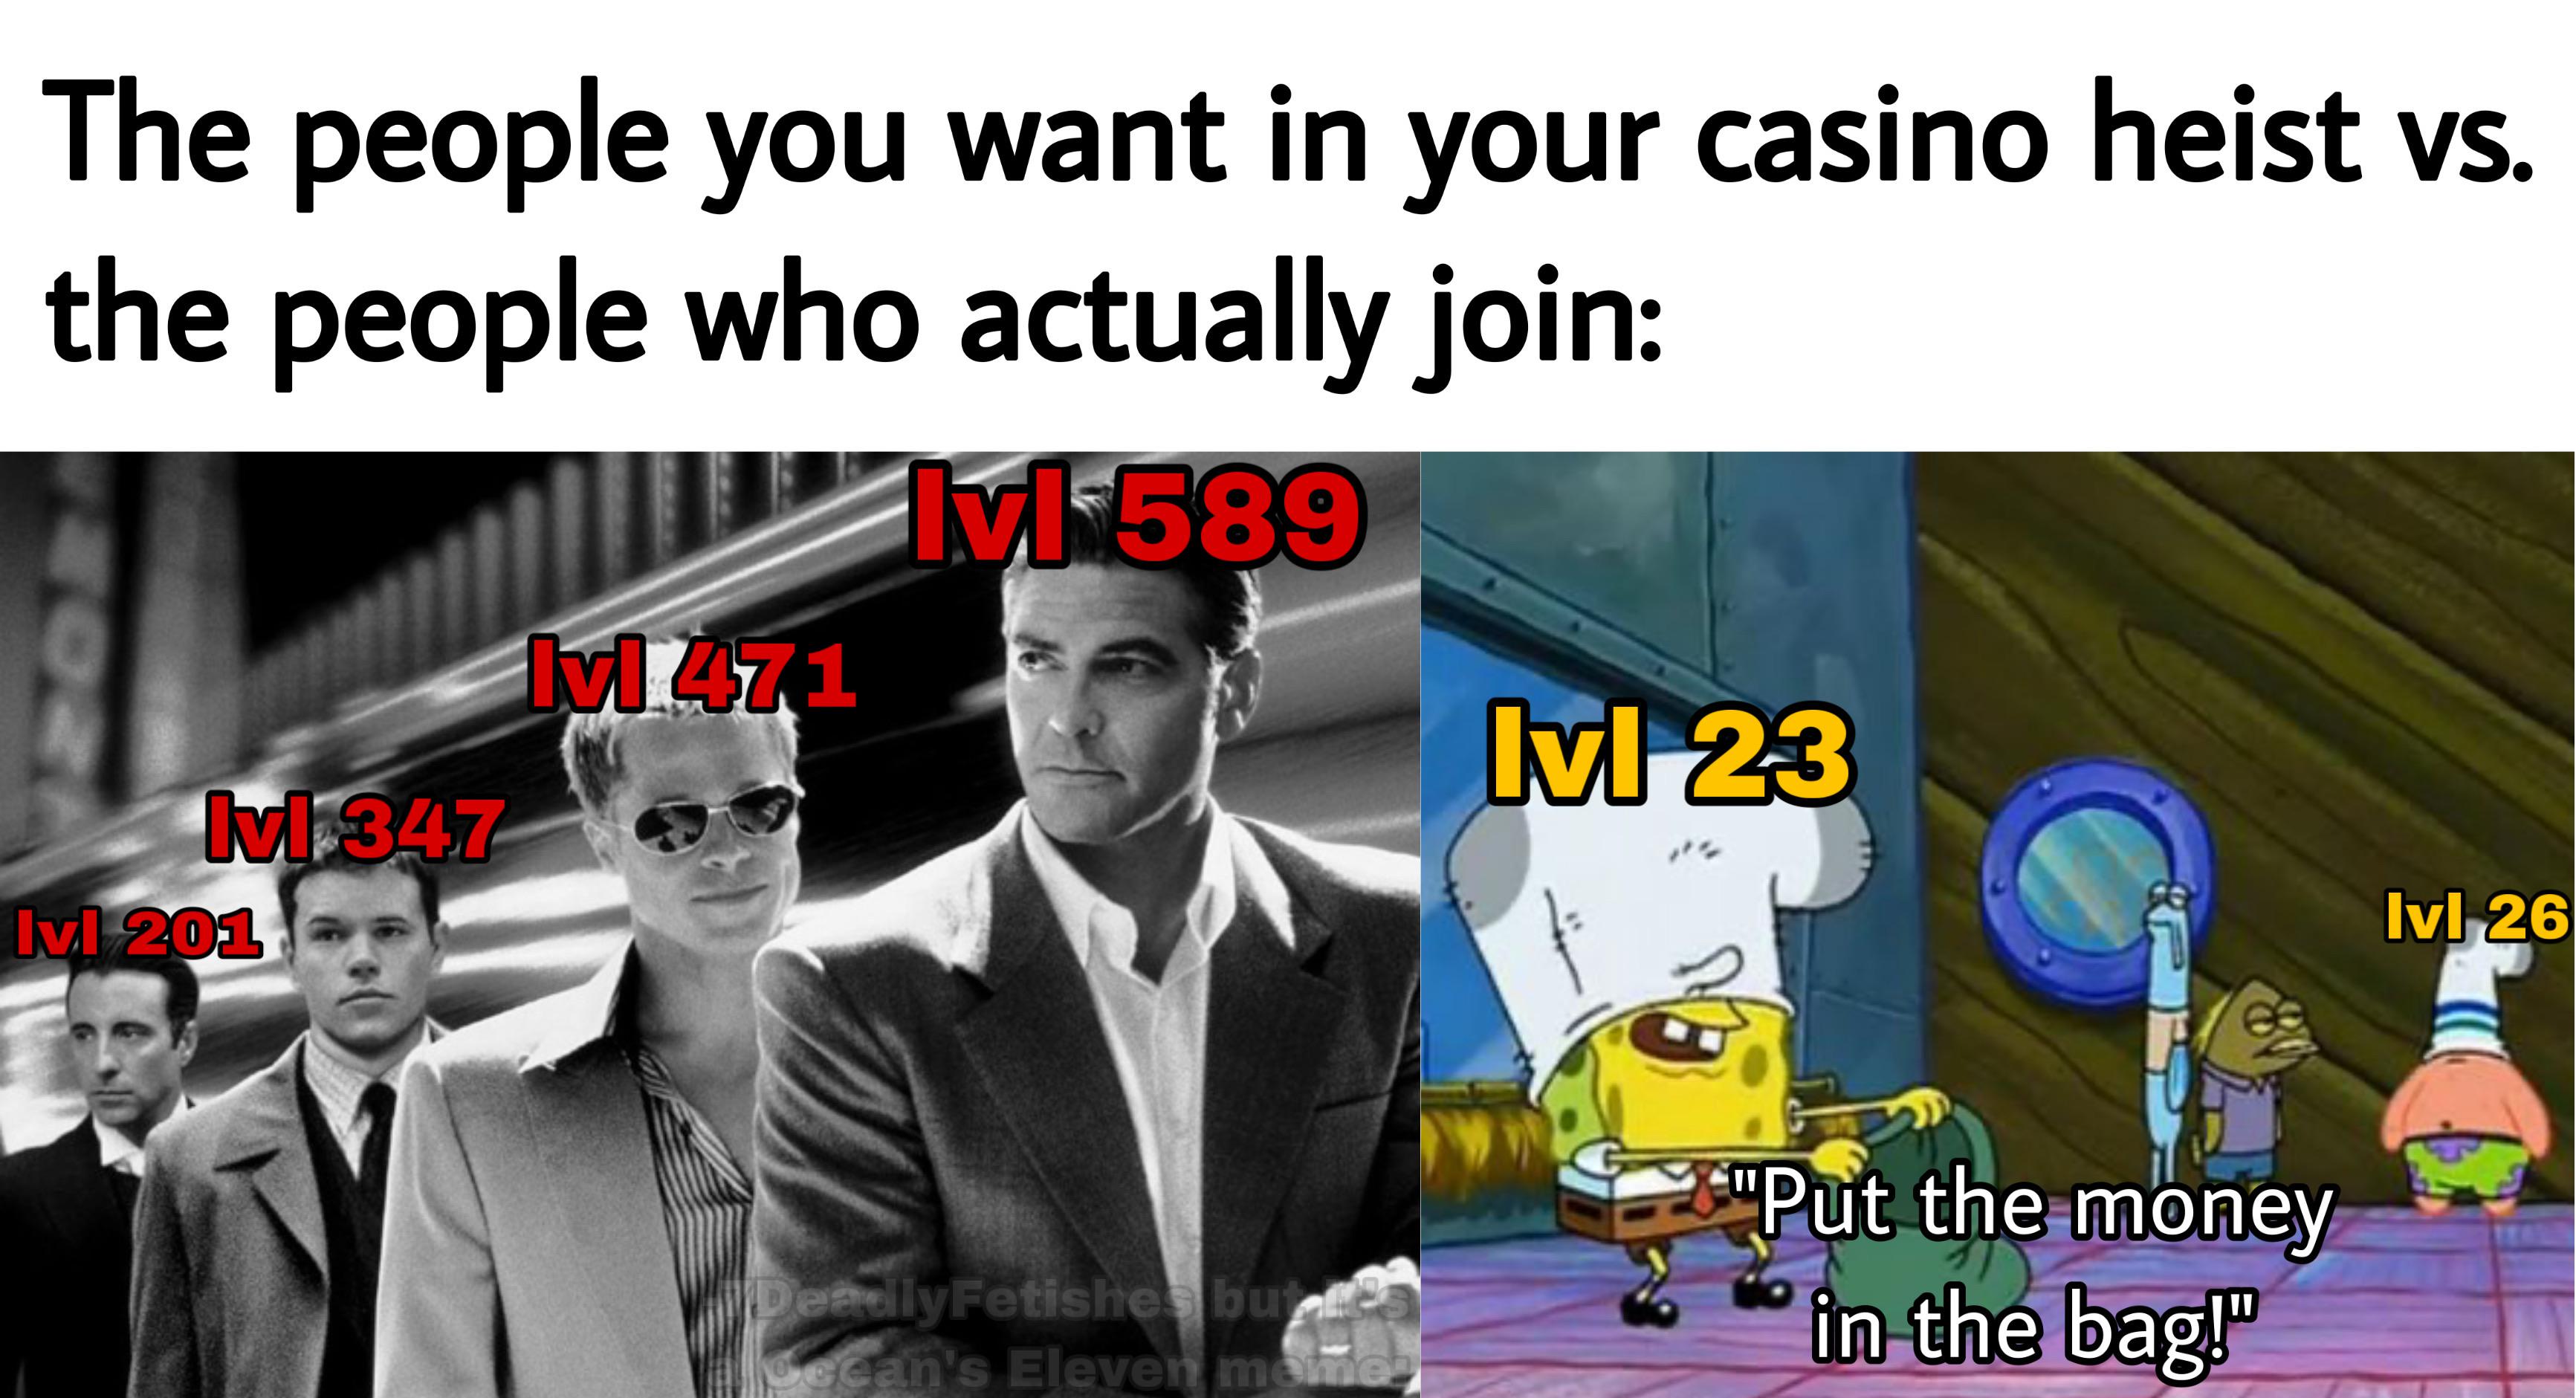 Grand Theft Auto Memes  - ocean's eleven dvd - The people you want in your casino heist vs. the people who actually join 146589 471 lvl 23 Mi 347 lvl 201 lvl 26